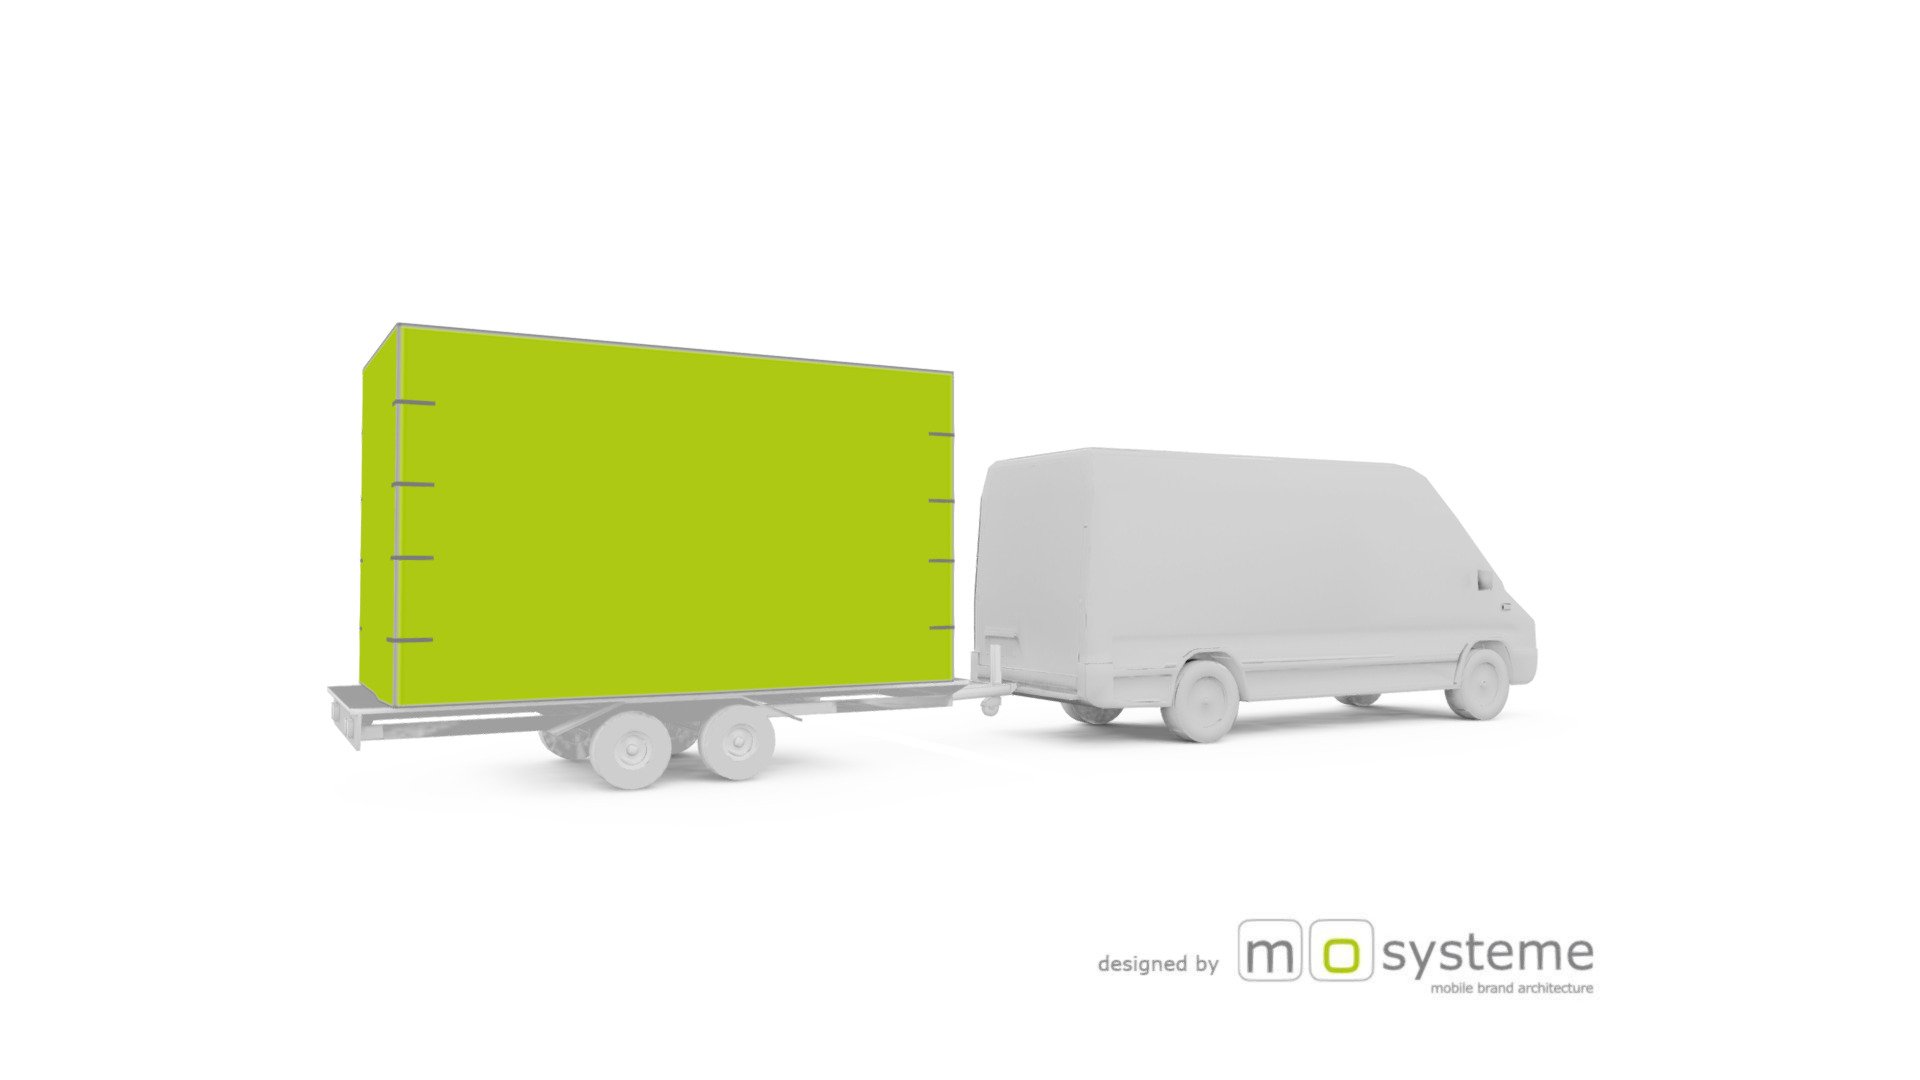 modulbox Max Trailer - 3D model by mo-systeme (@mosysteme) 3d model